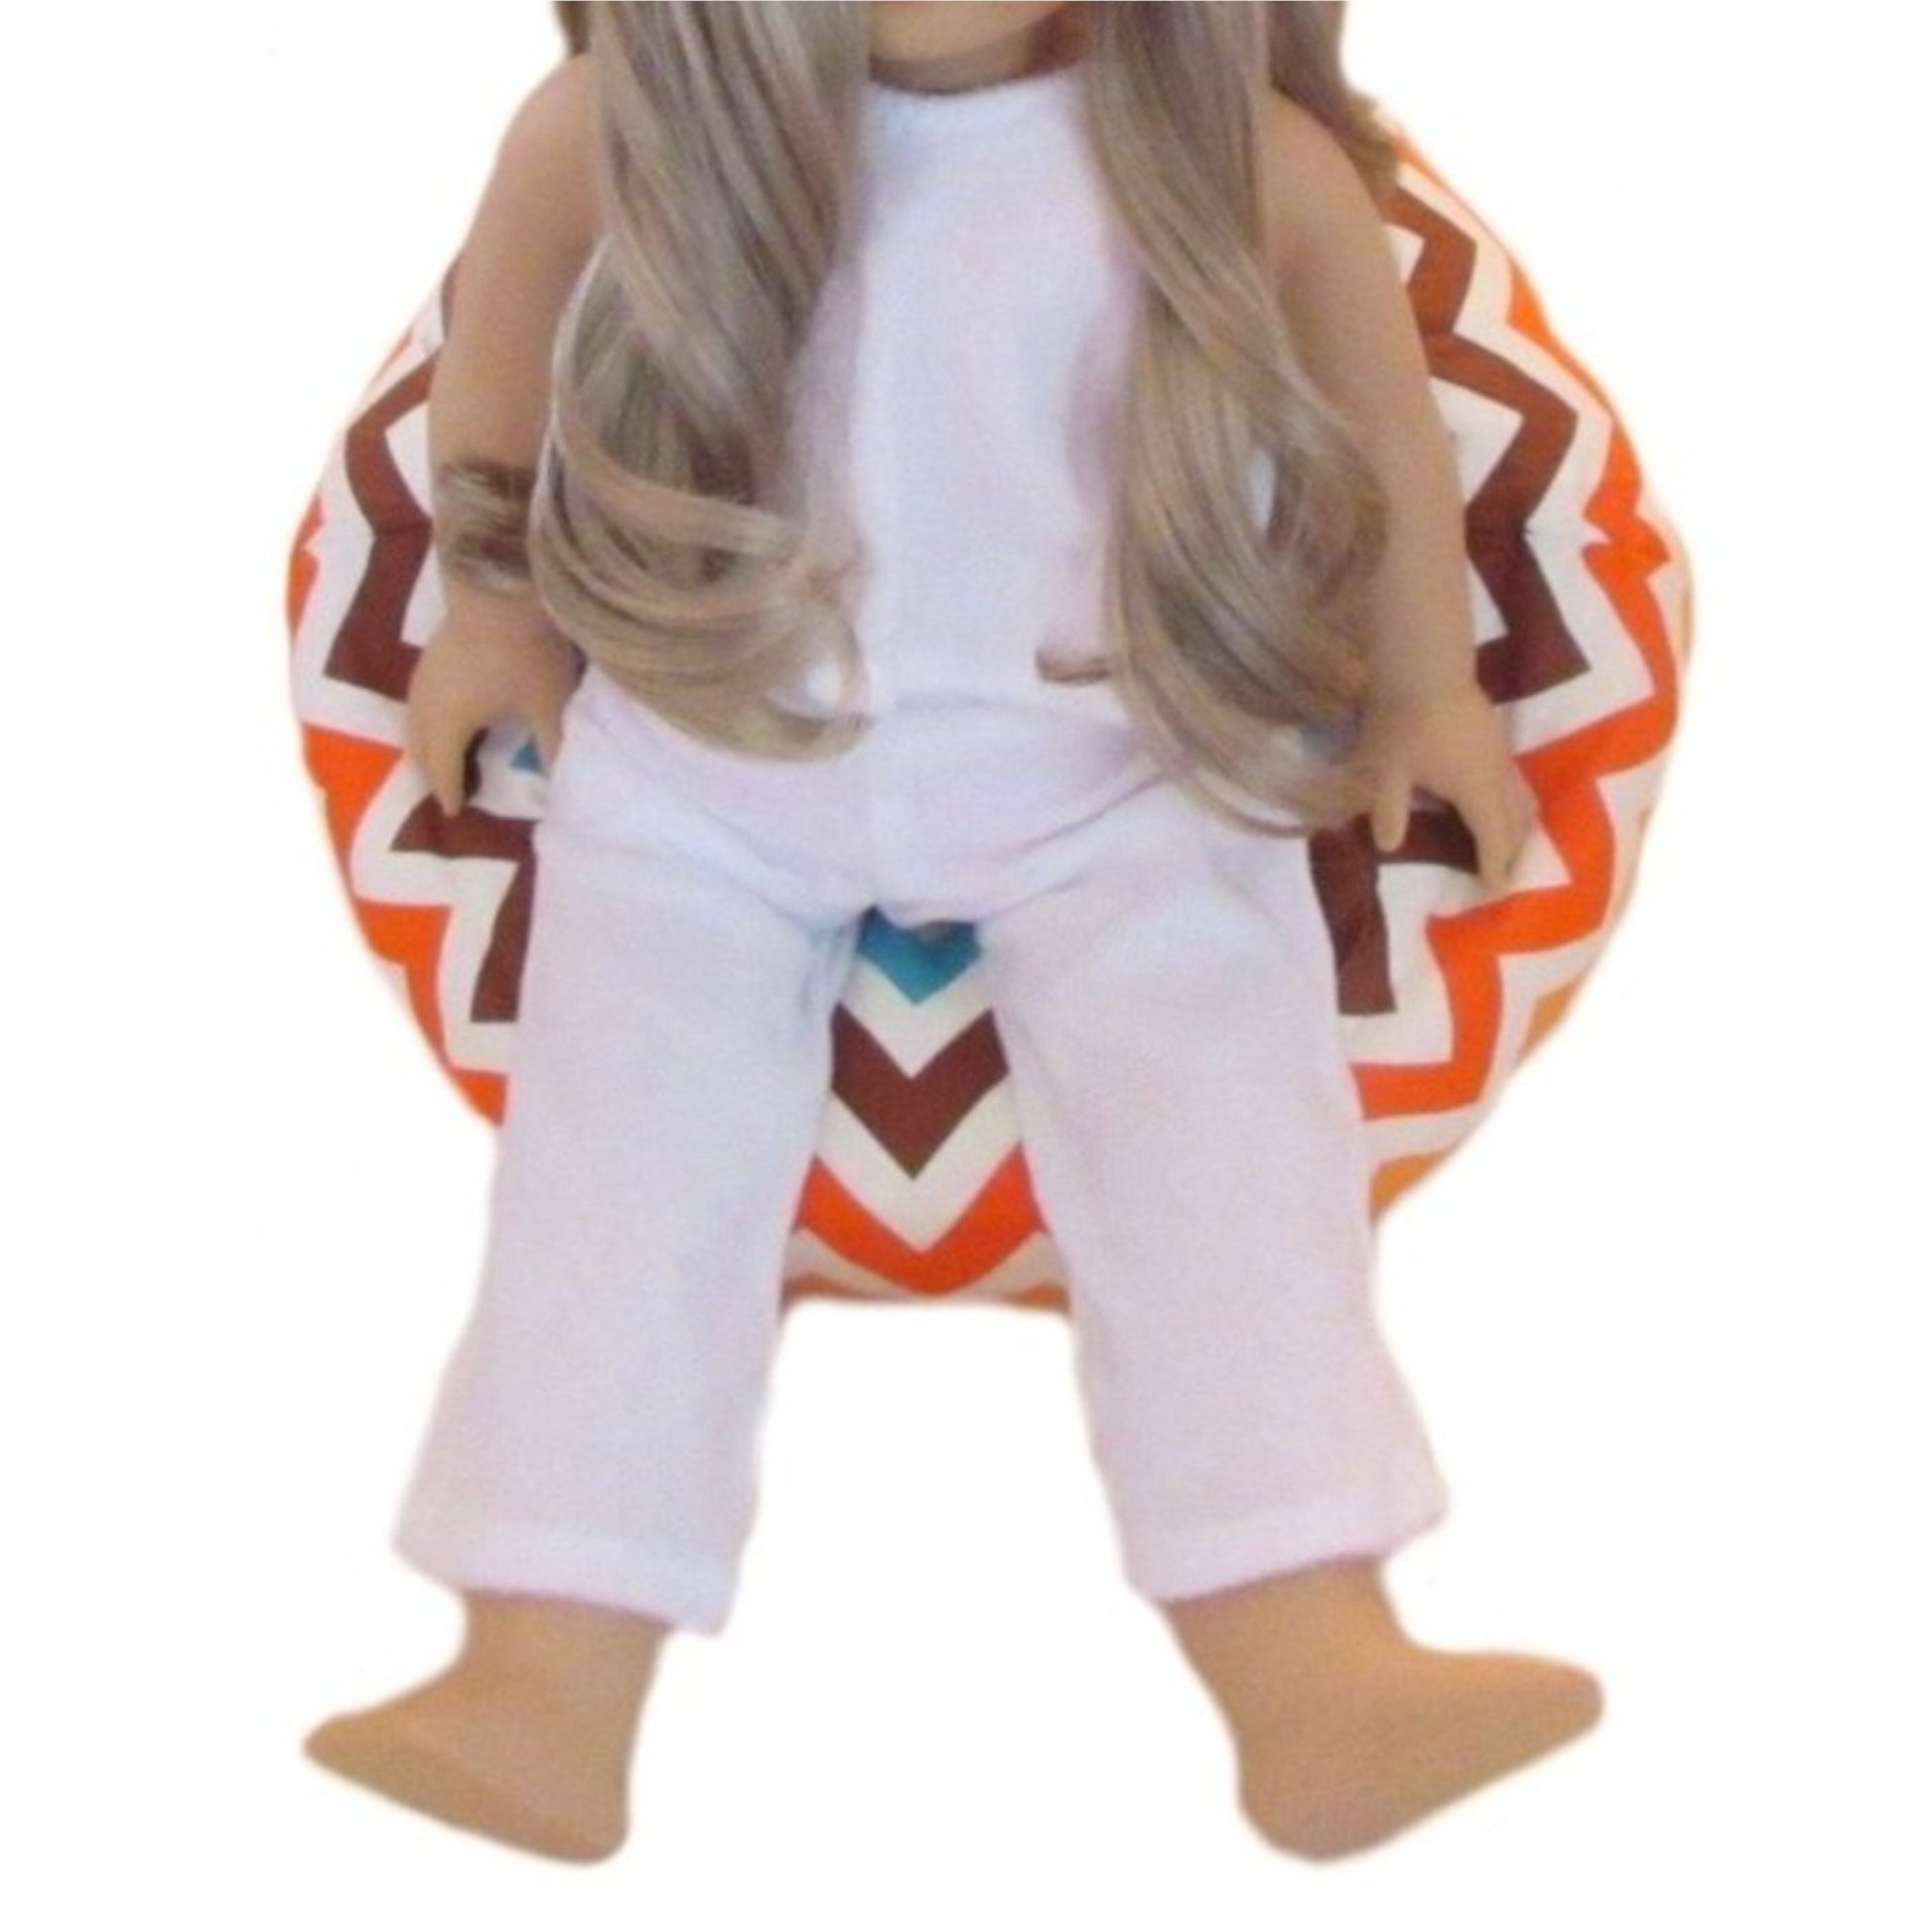 Brown Orange Turquoise Chevron Doll Bean Bag Chair for 18-inch dolls with doll